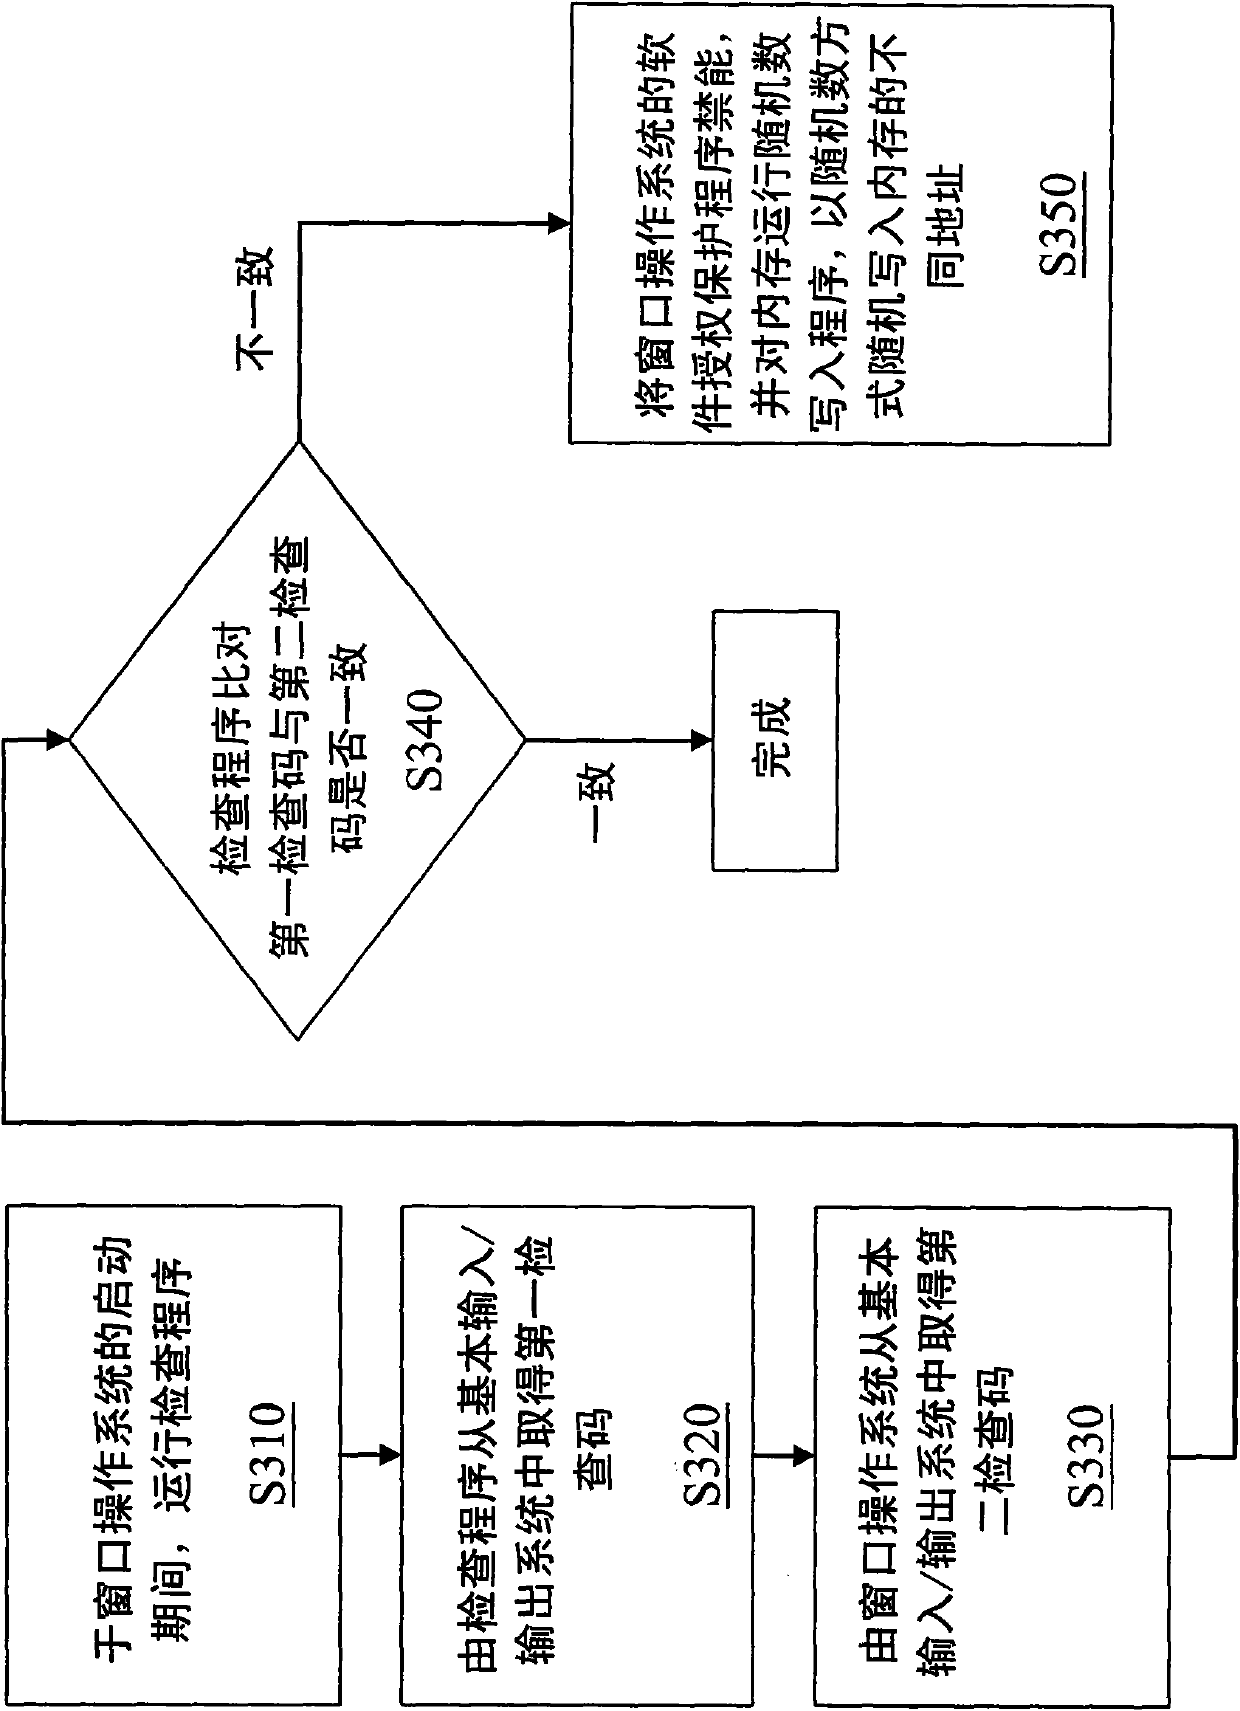 Method for verifying computer operating windows operating system